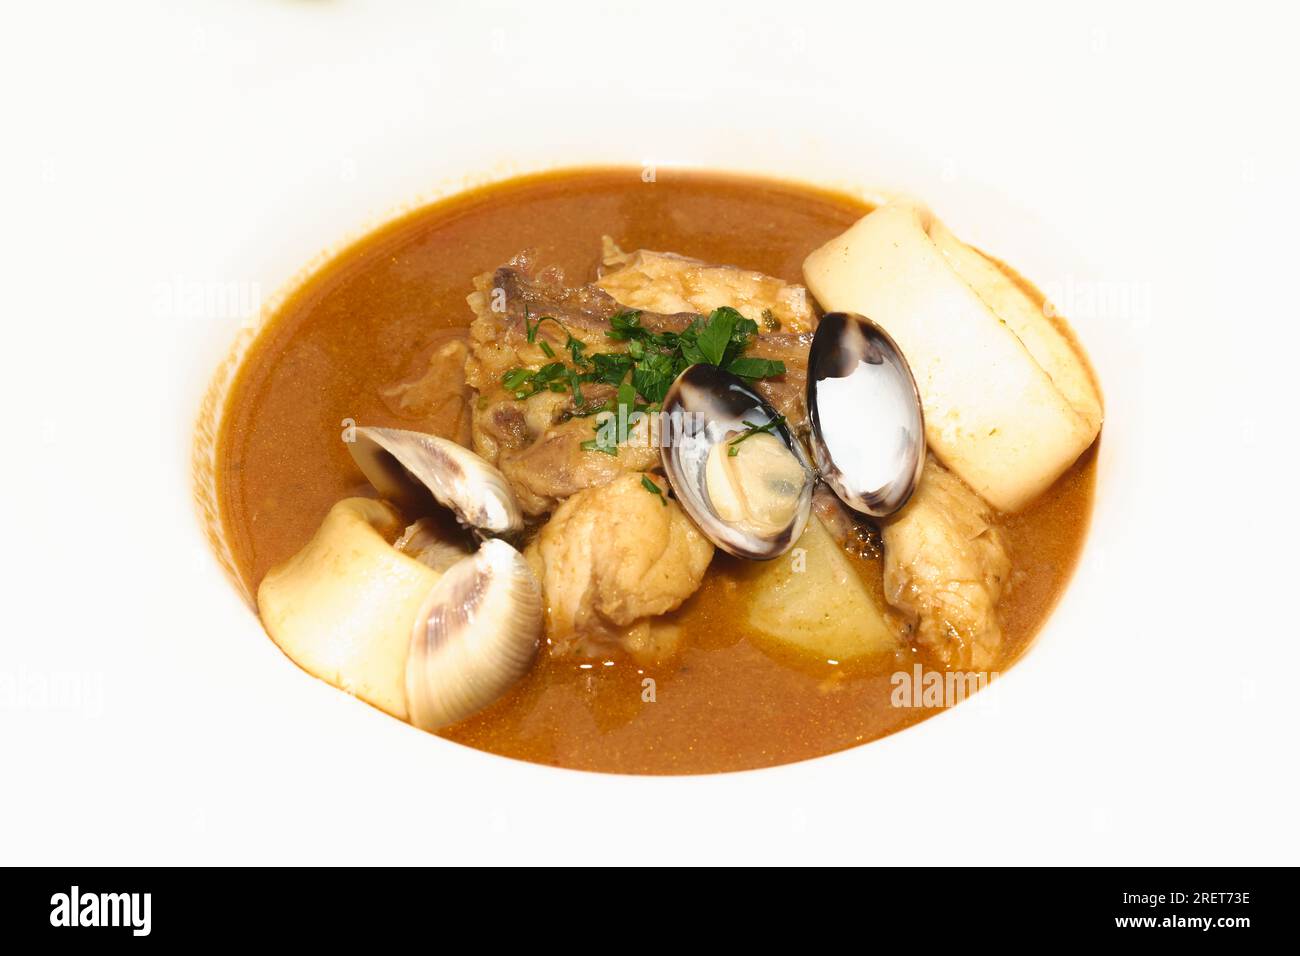 Seafood soup close-up in a white plate. Food and cooking concept. Stock Photo